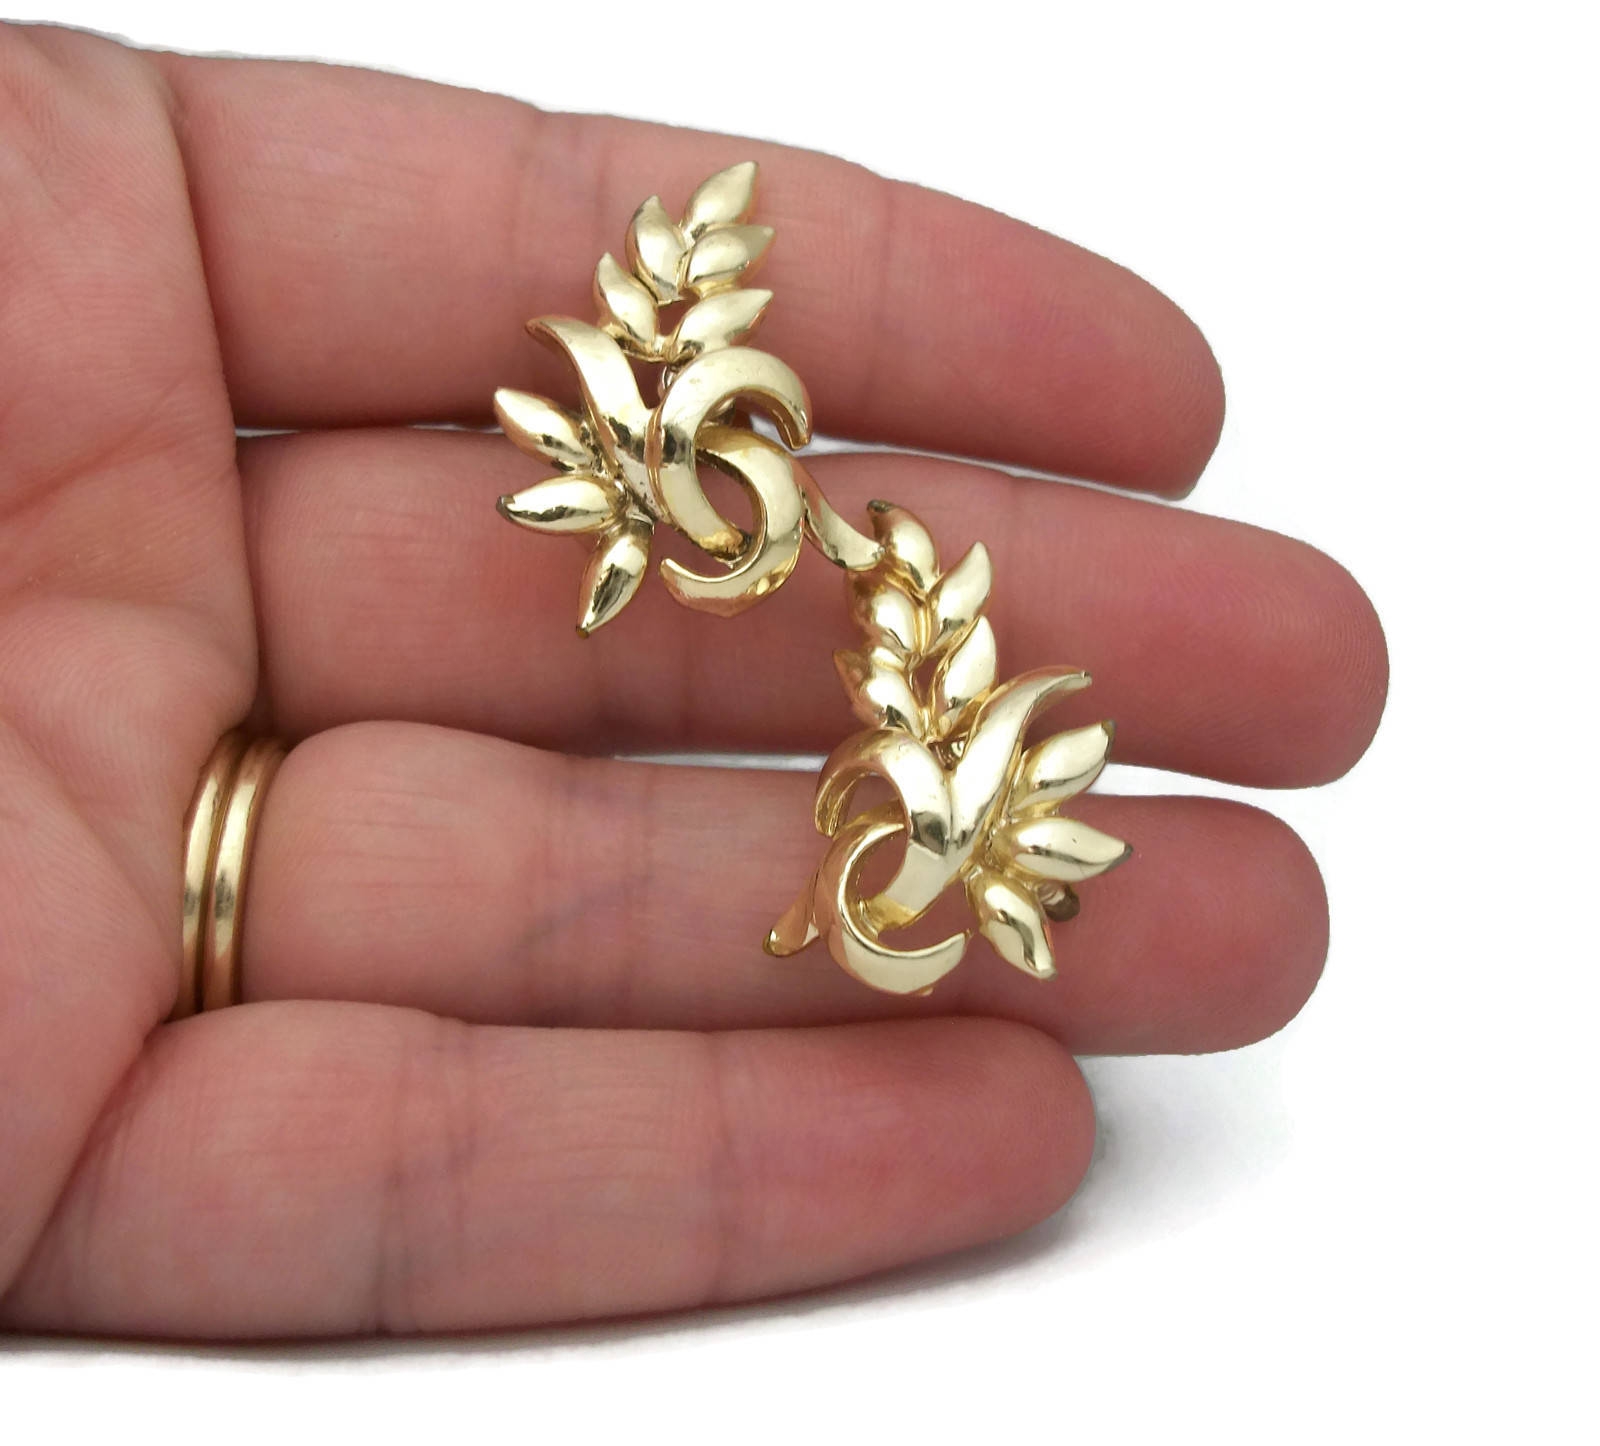 Vintage Gold Tone Cameo Earrings, Screw back, signed Coro, Mid-Century –  Maria's Vintage